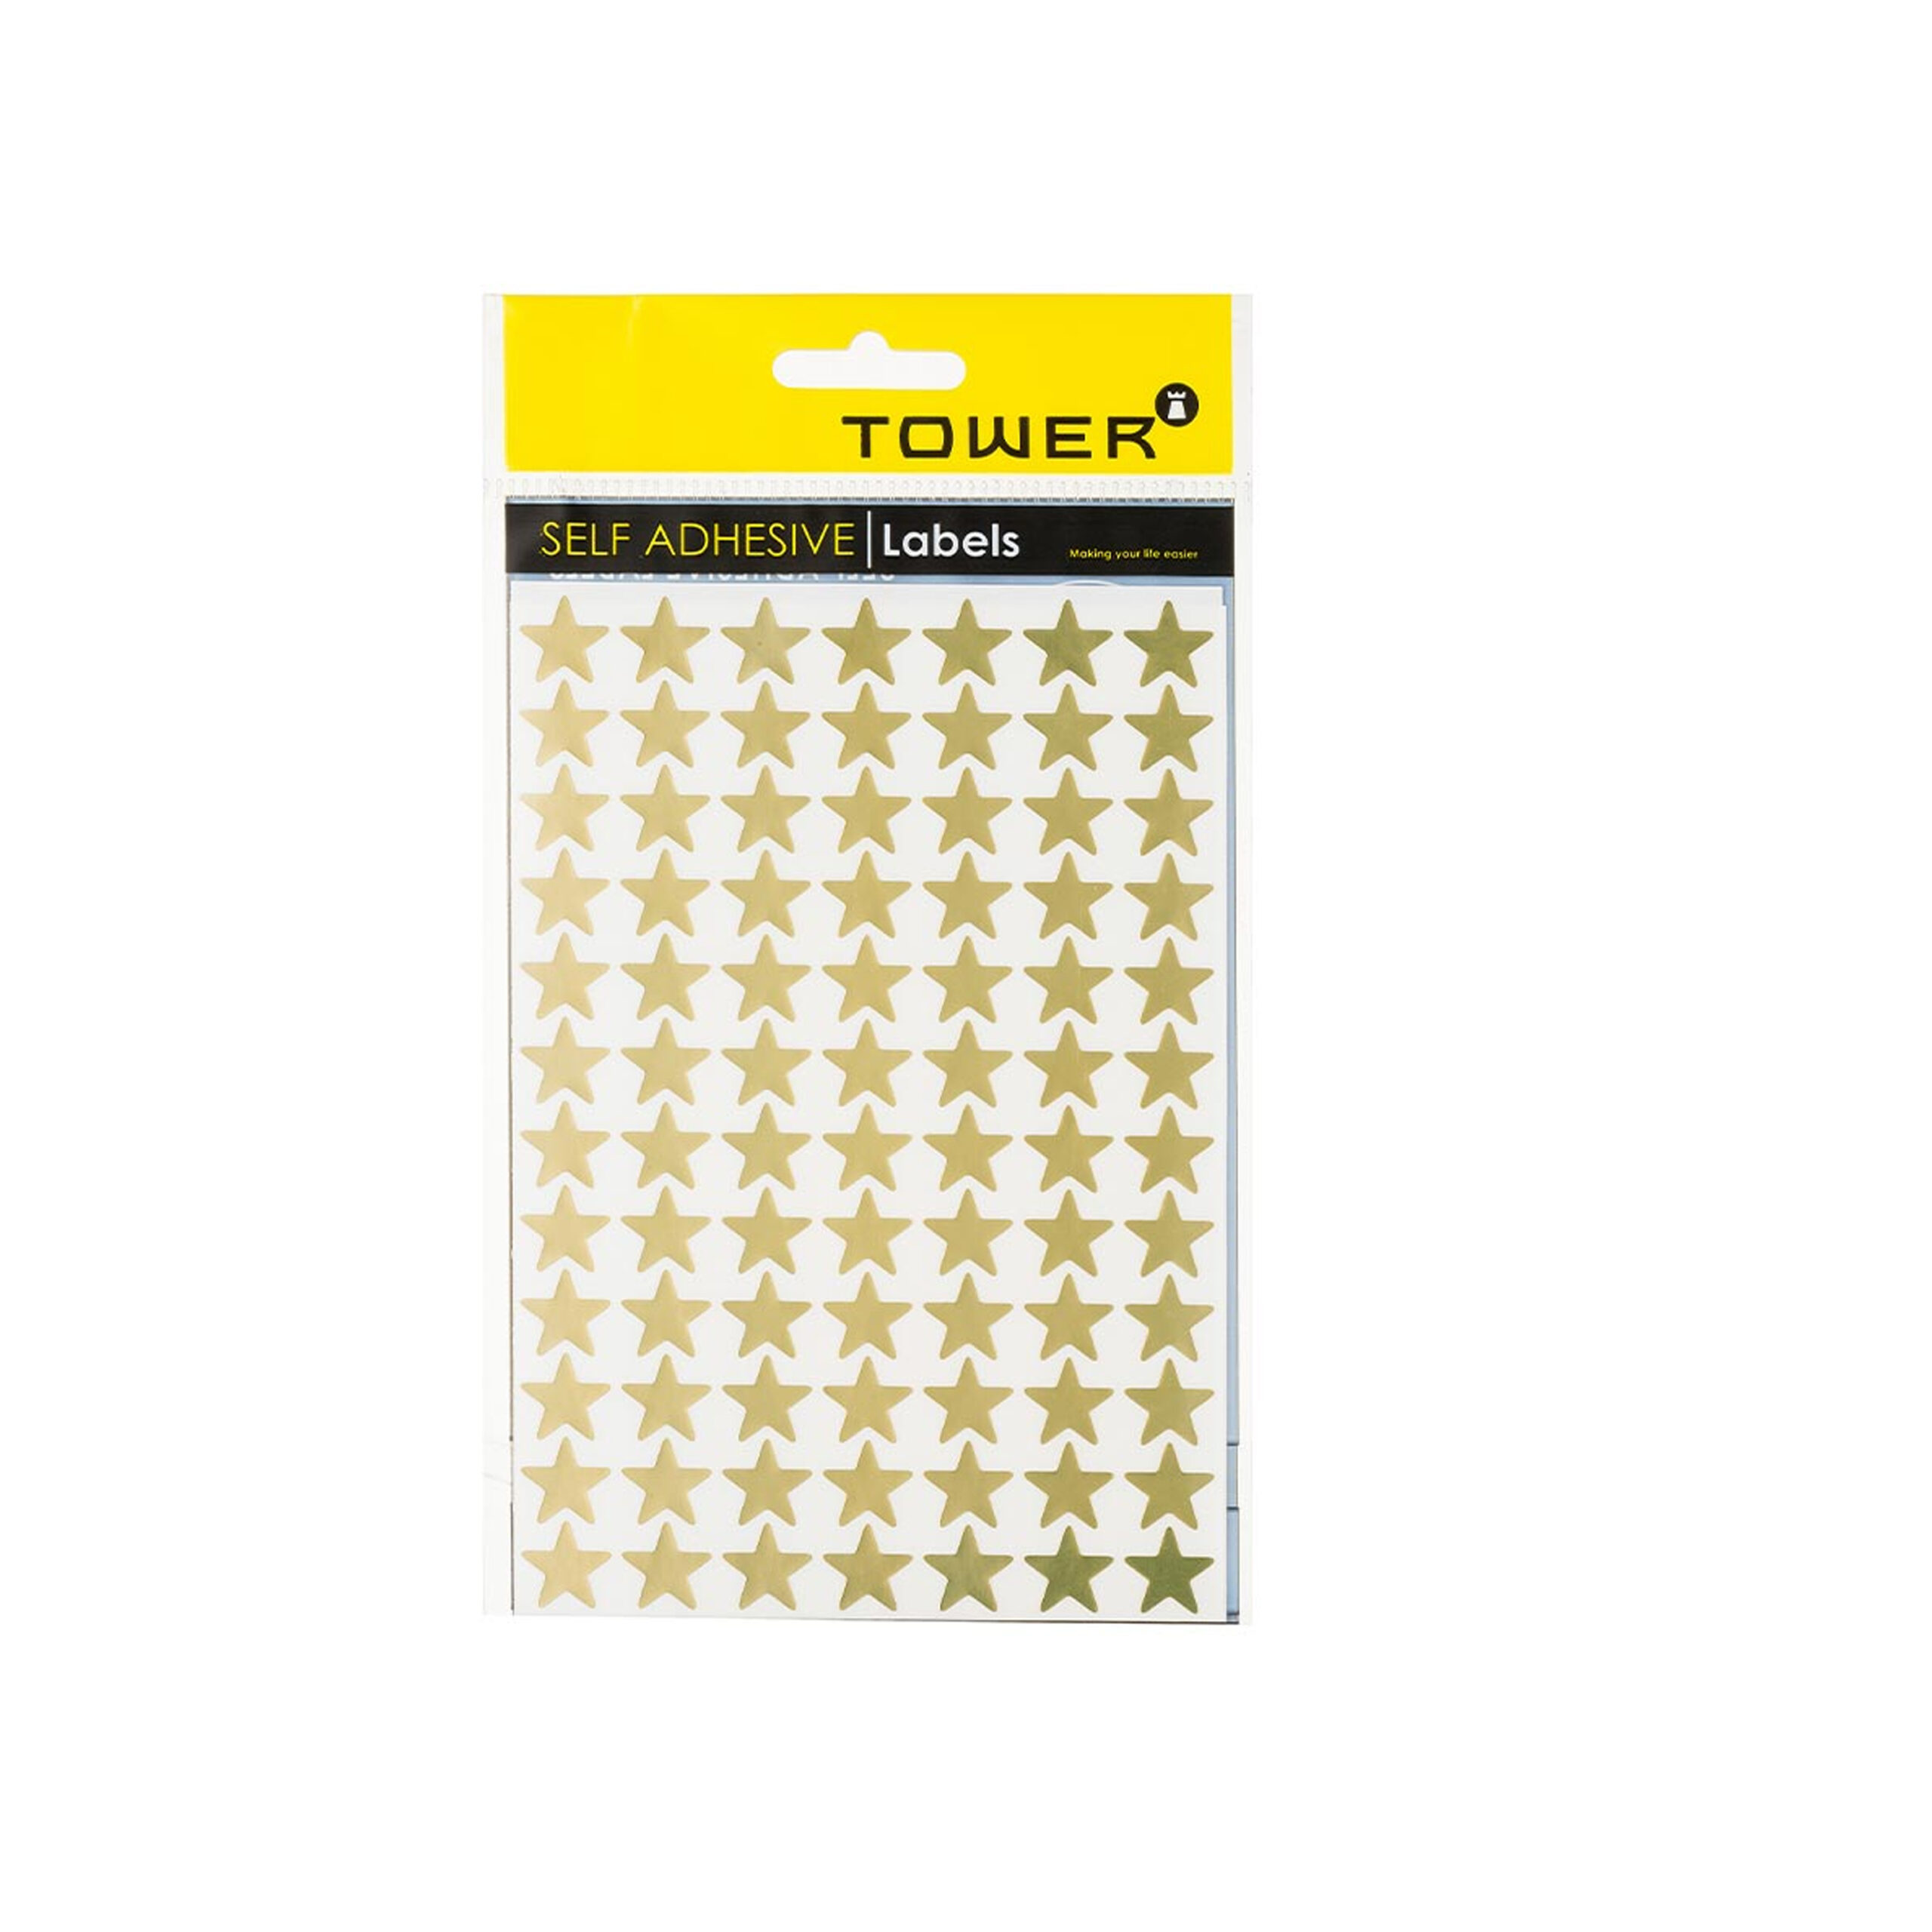 TOWER  SELF
ADHESIVE "GOLD
STARS"  (168
LABELS)